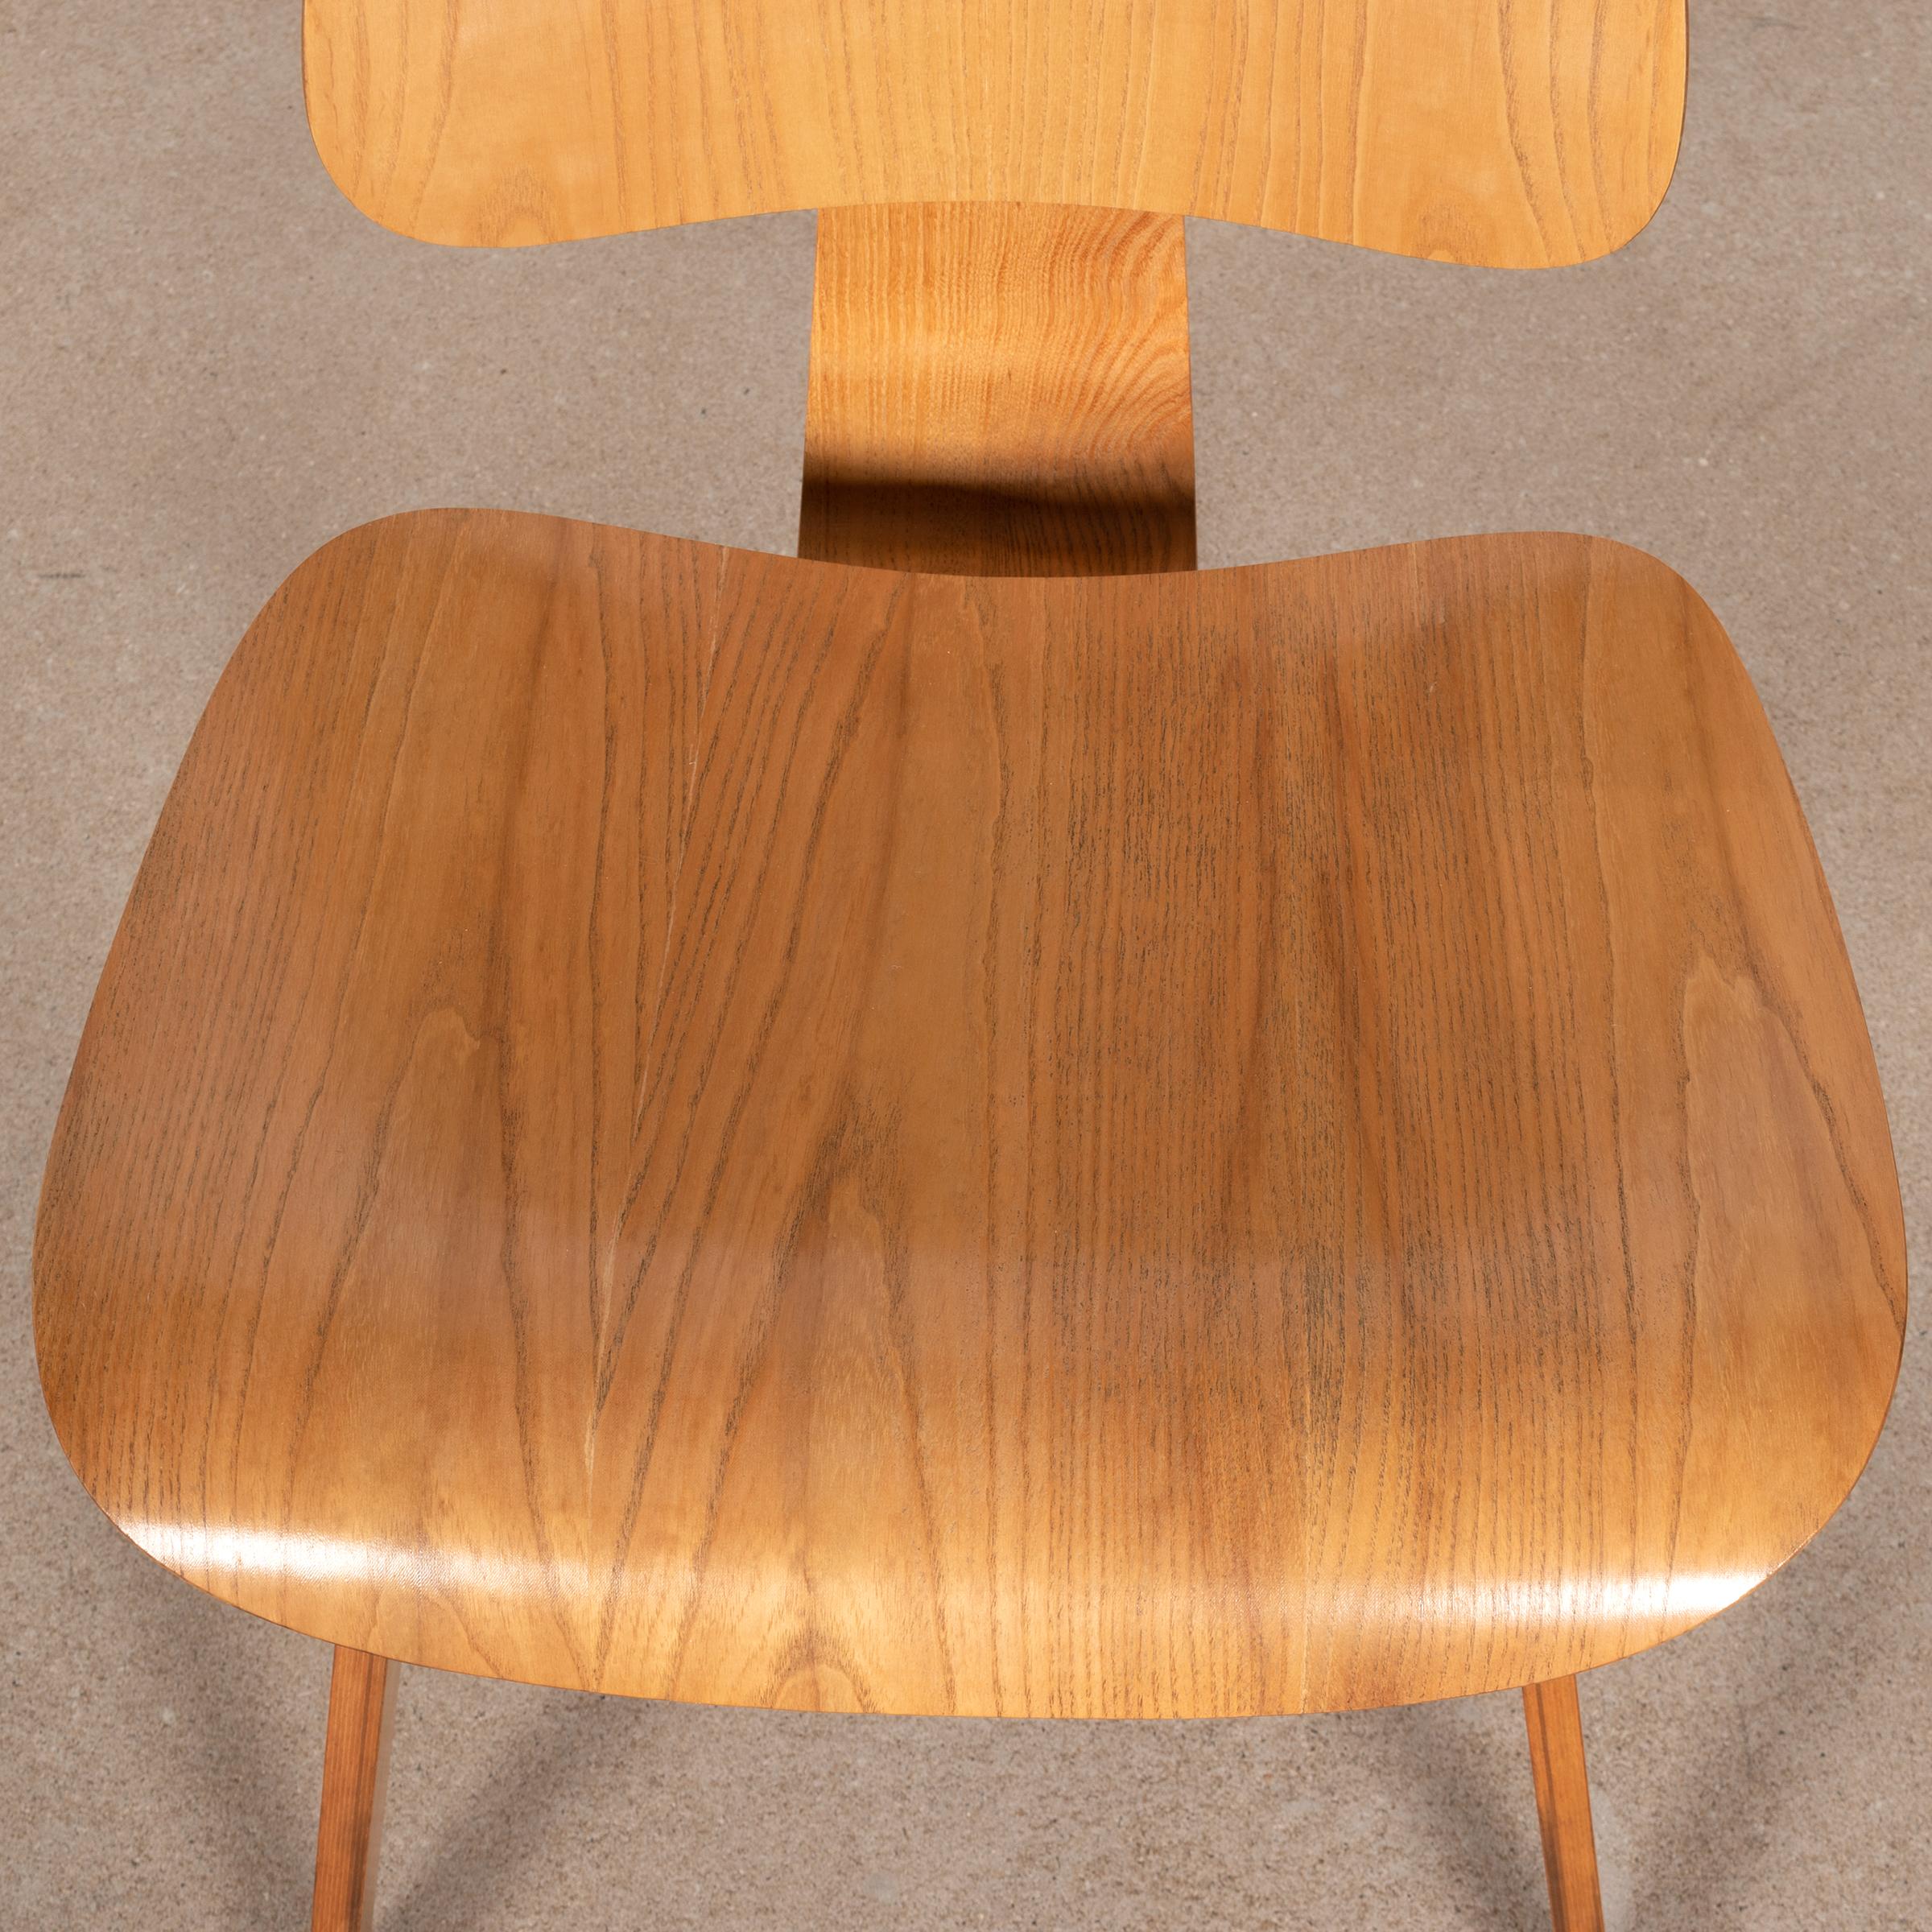 Plywood Charles and Ray Eames early DCW Ash Dining Chair for Herman Miller